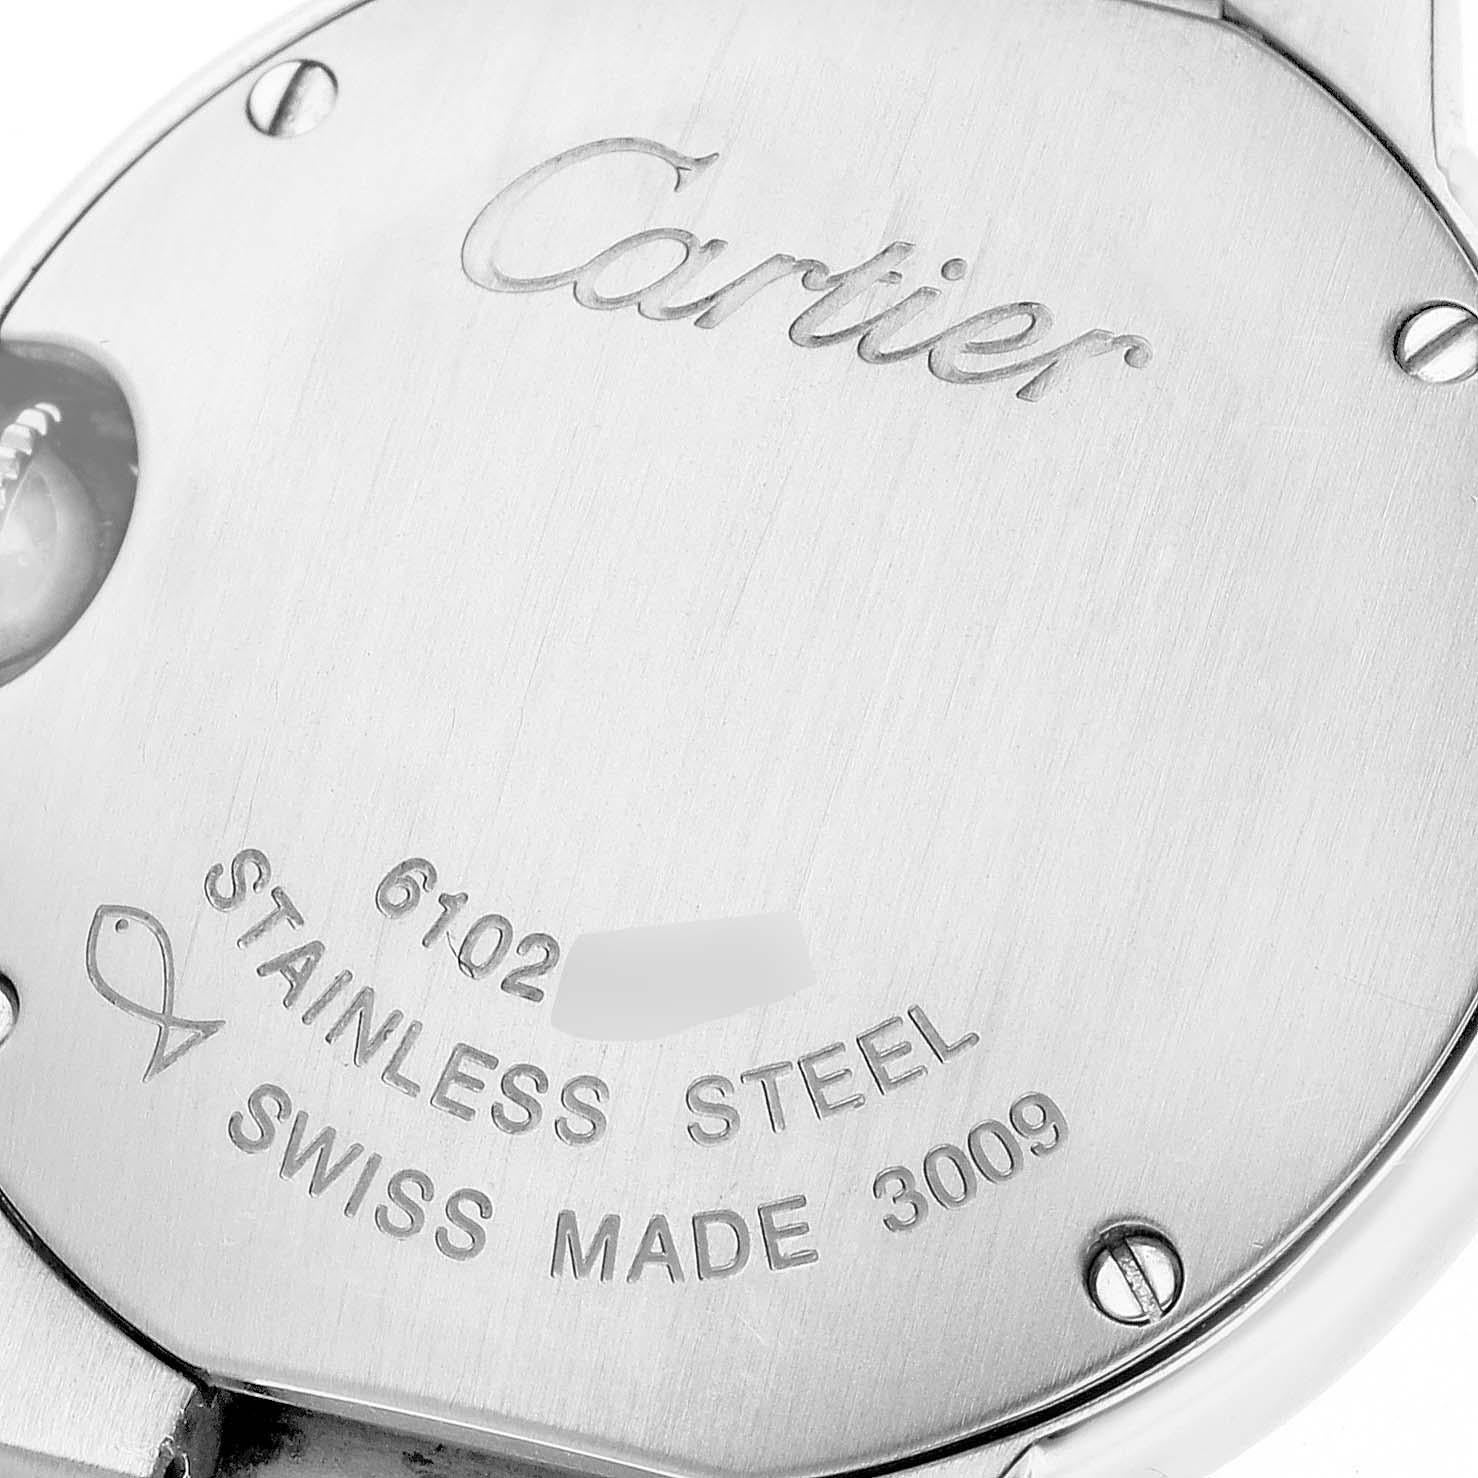 Cartier Ballon Bleu Silver Dial Quartz Steel Ladies Watch W69010Z4 Box Papers. Quartz movement. Round stainless steel case 28.0 mm in diameter. Fluted crown set with a blue spinel cabochon. Stainless steel smooth bezel. Scratch resistant sapphire